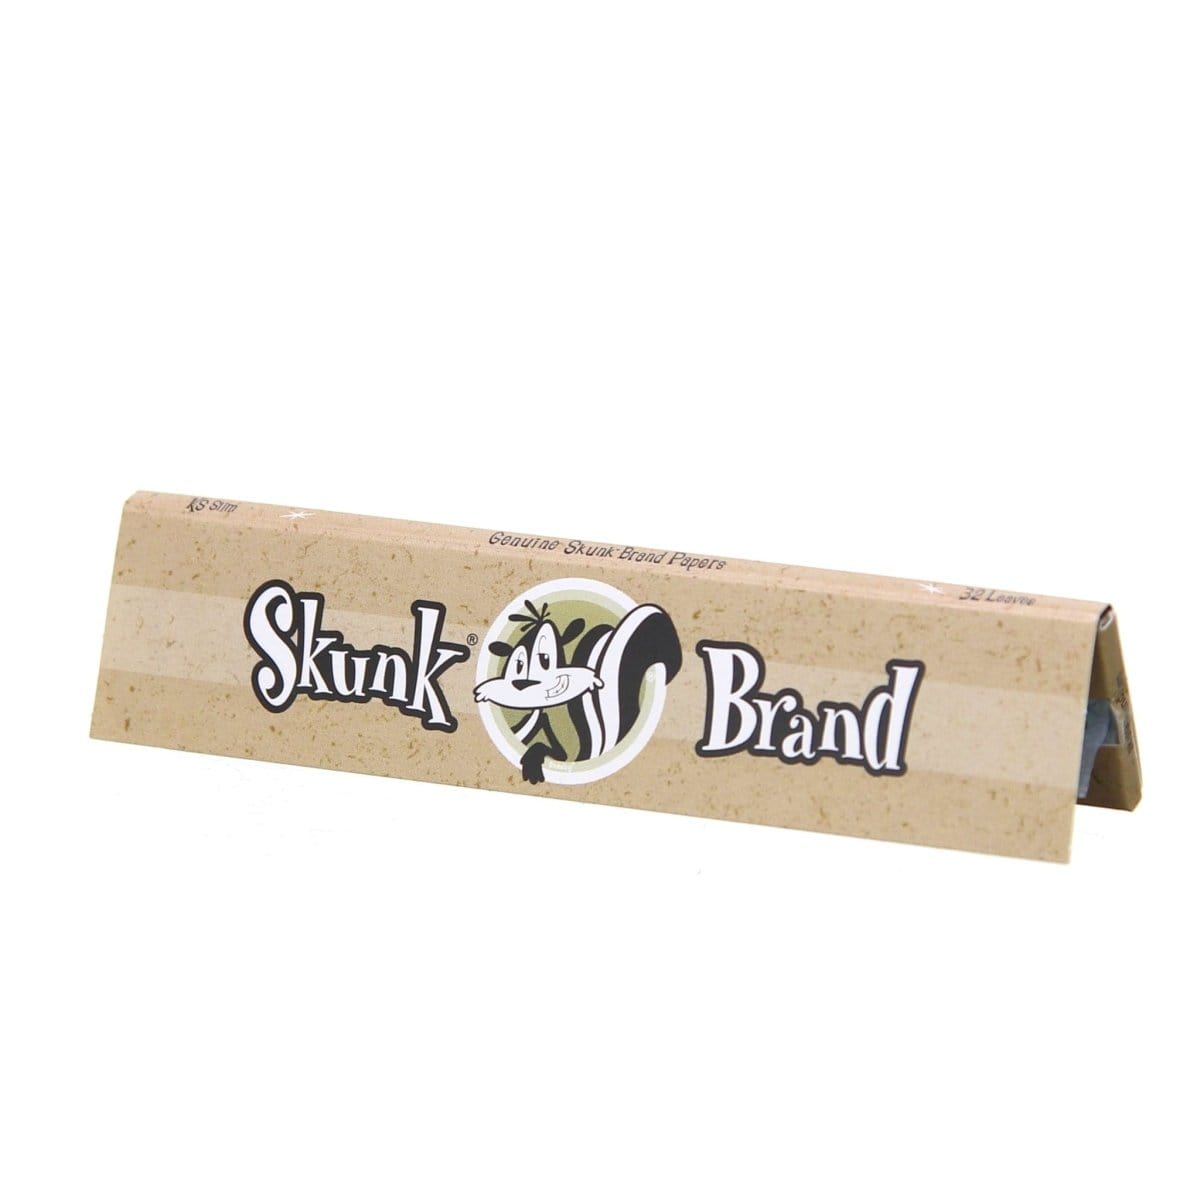 Skunk Brand King Size Slim Rolling Papers